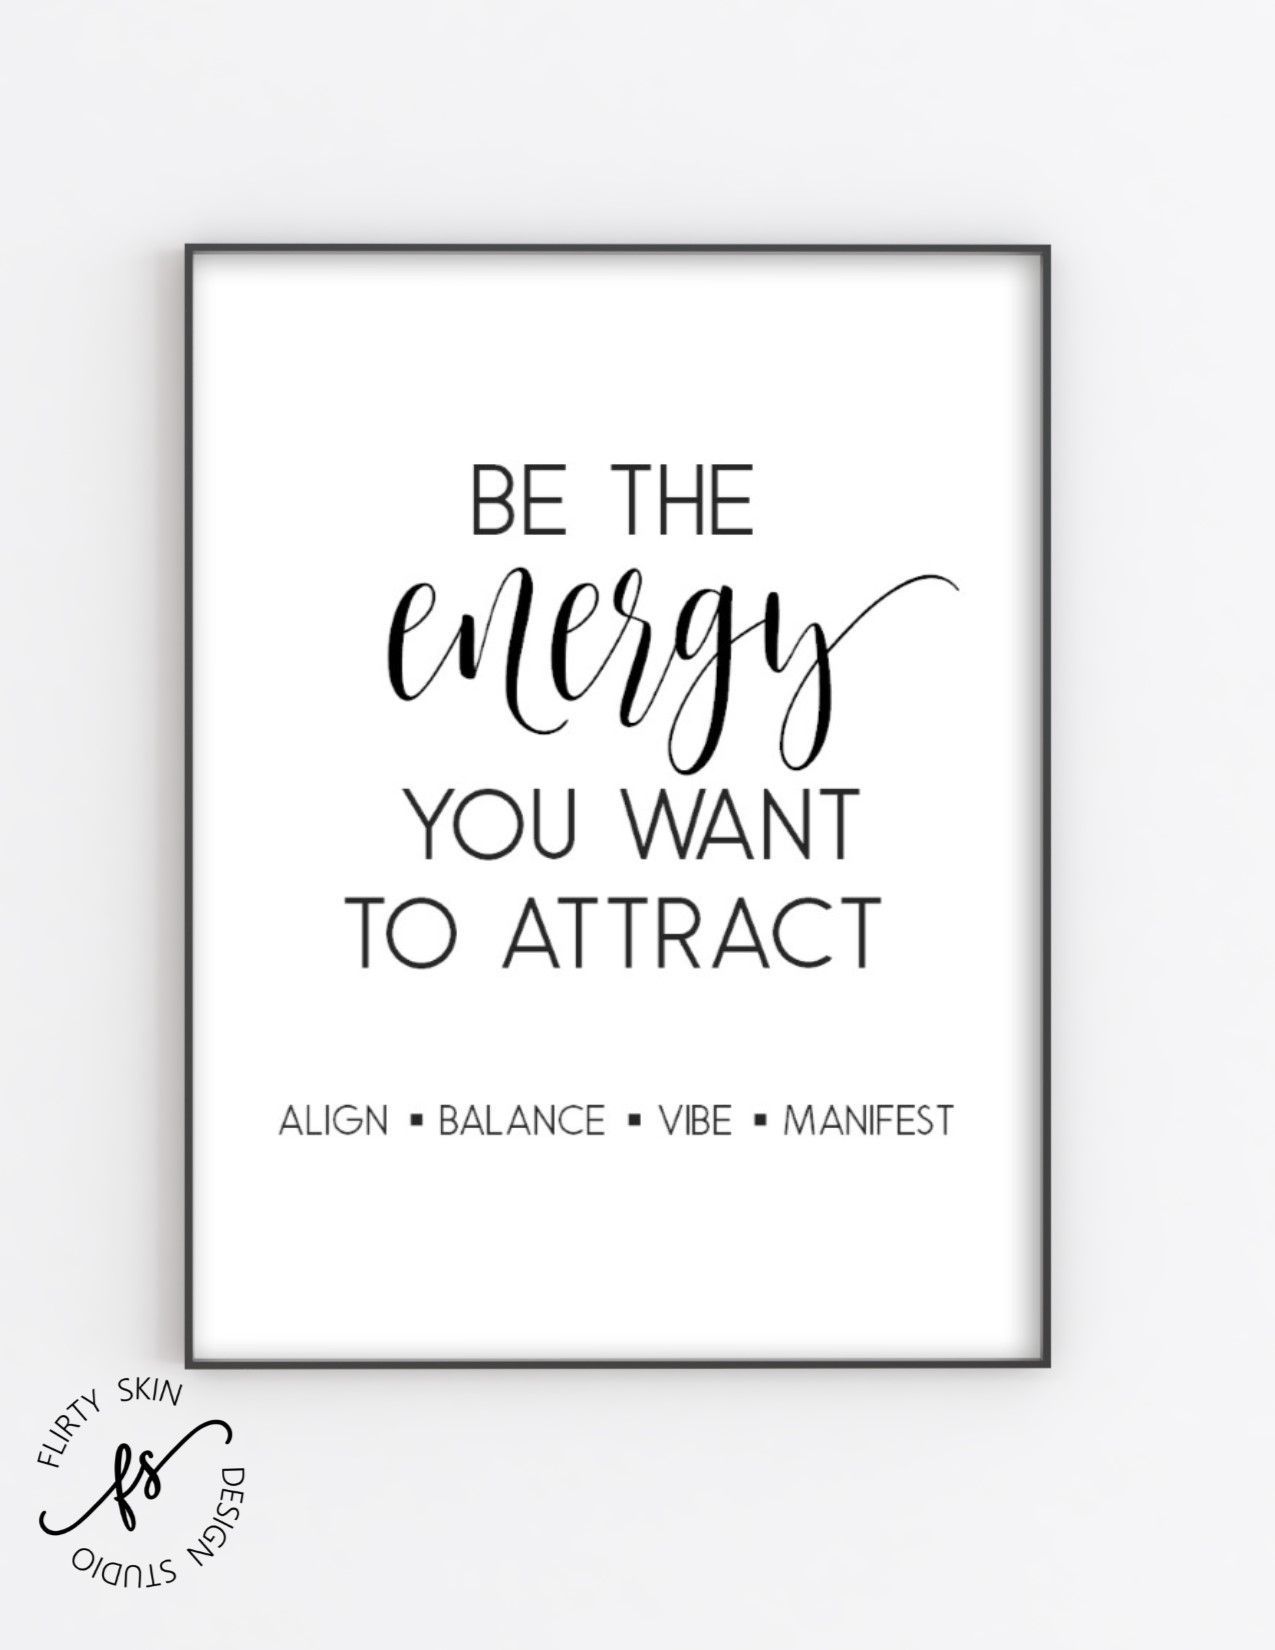 Be The Energy You Want To Attract - Be The Energy You Want To Attract -   16 beauty Therapy pictures ideas